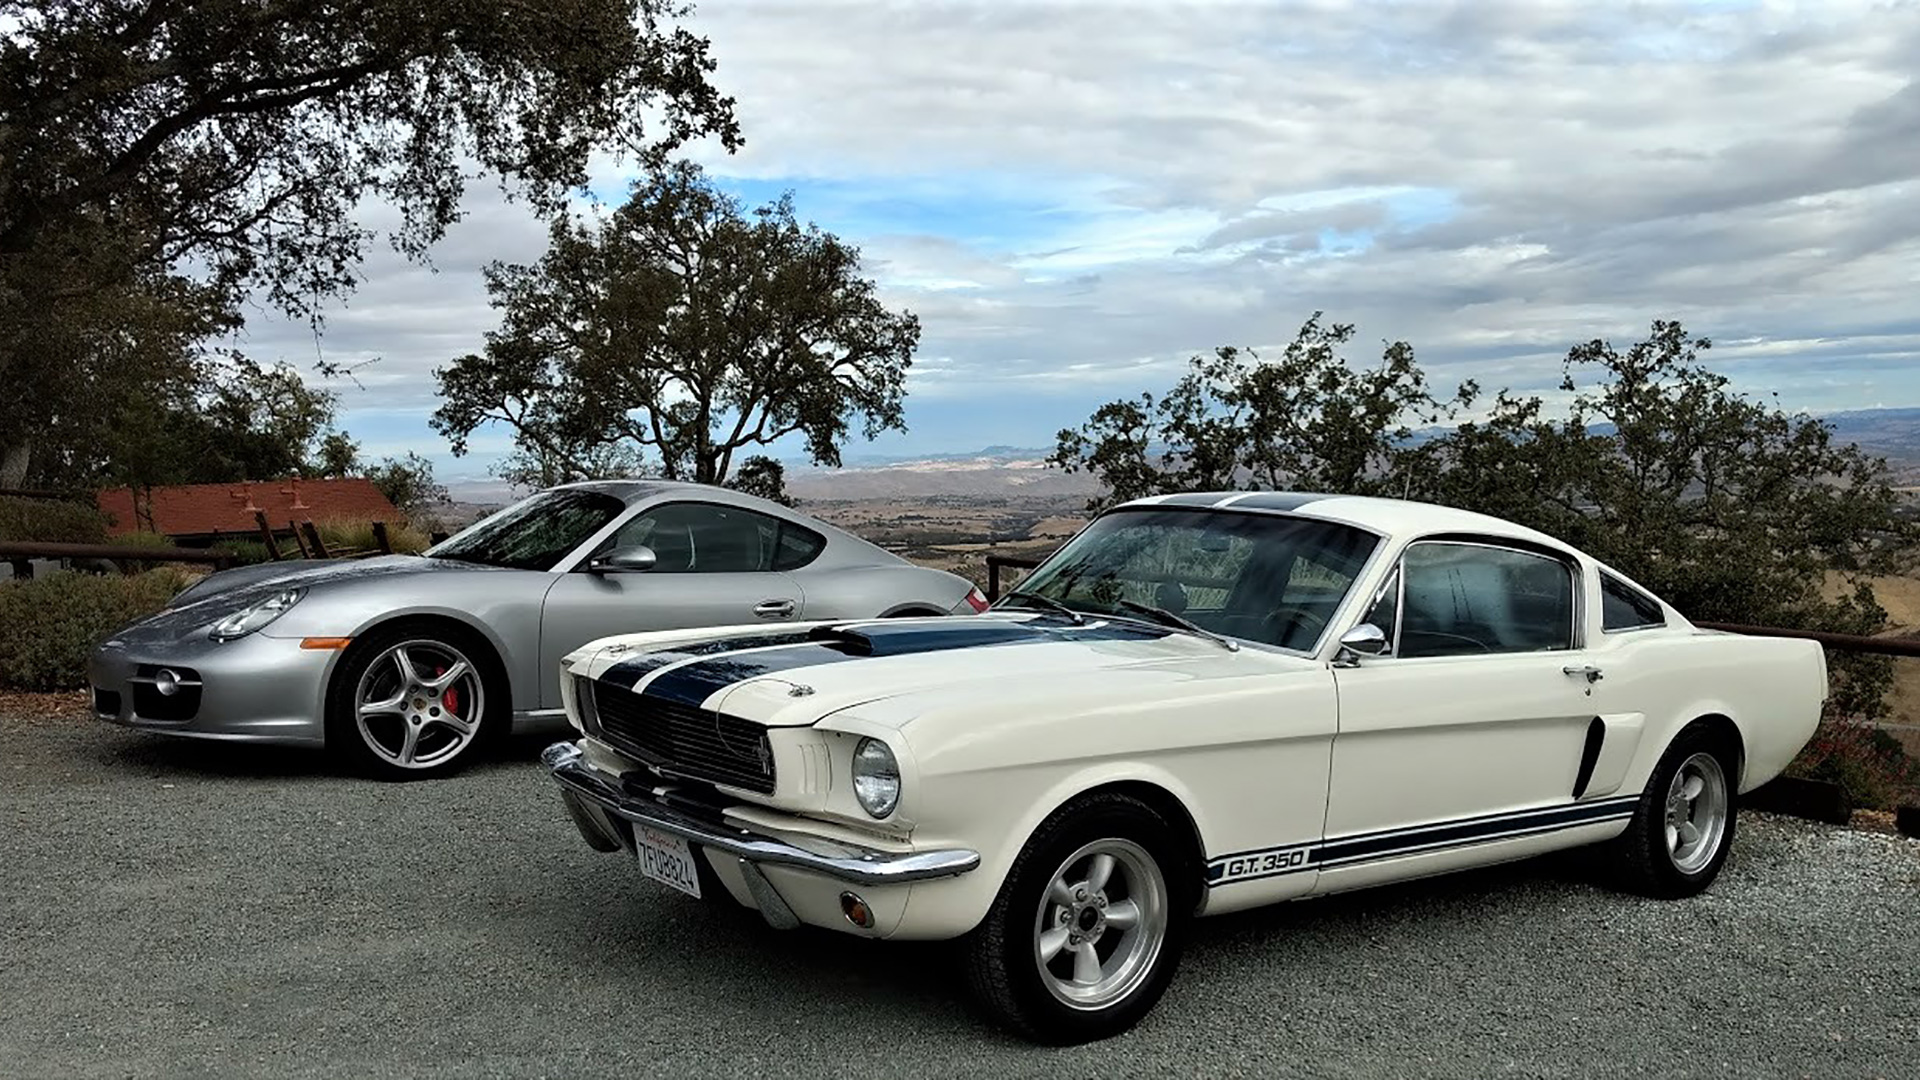 White Ford Mustang Shelby GT350 and Silver Porsche classic cars